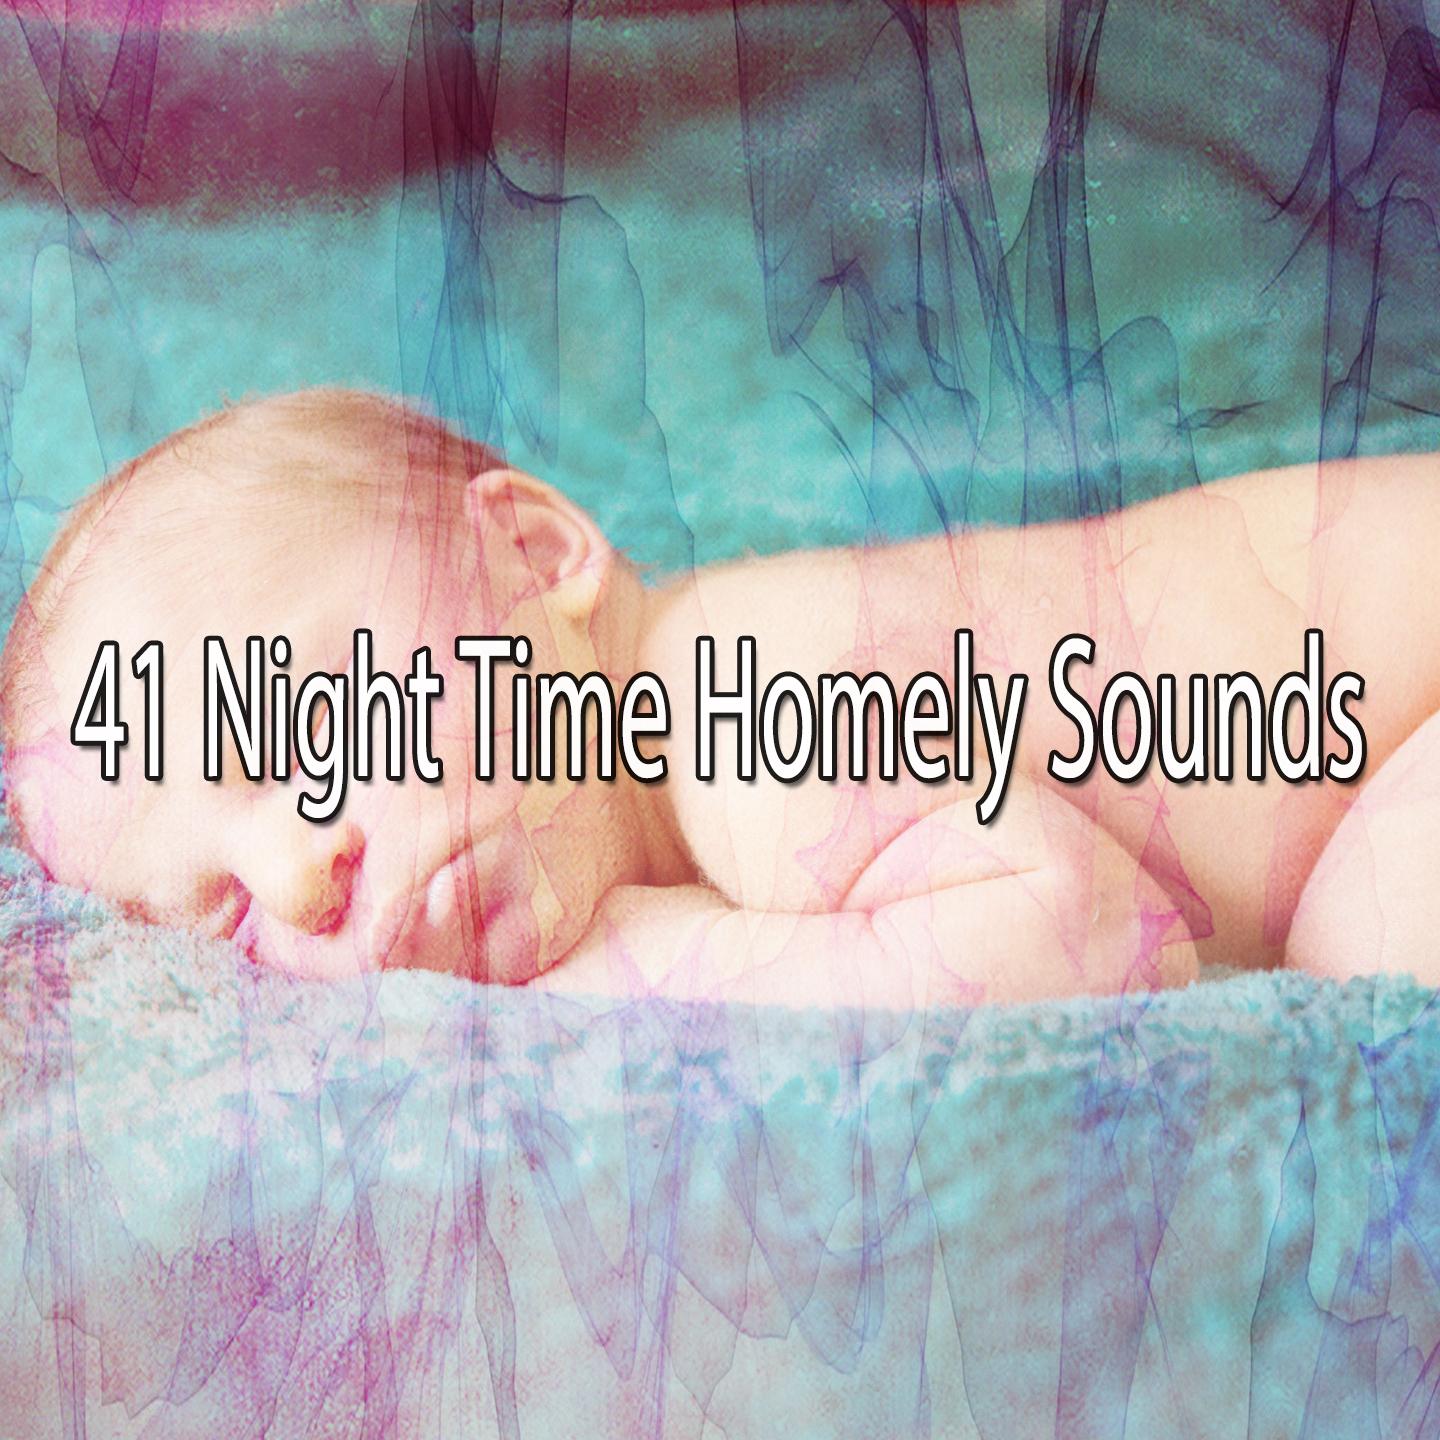 41 Night Time Homely Sounds